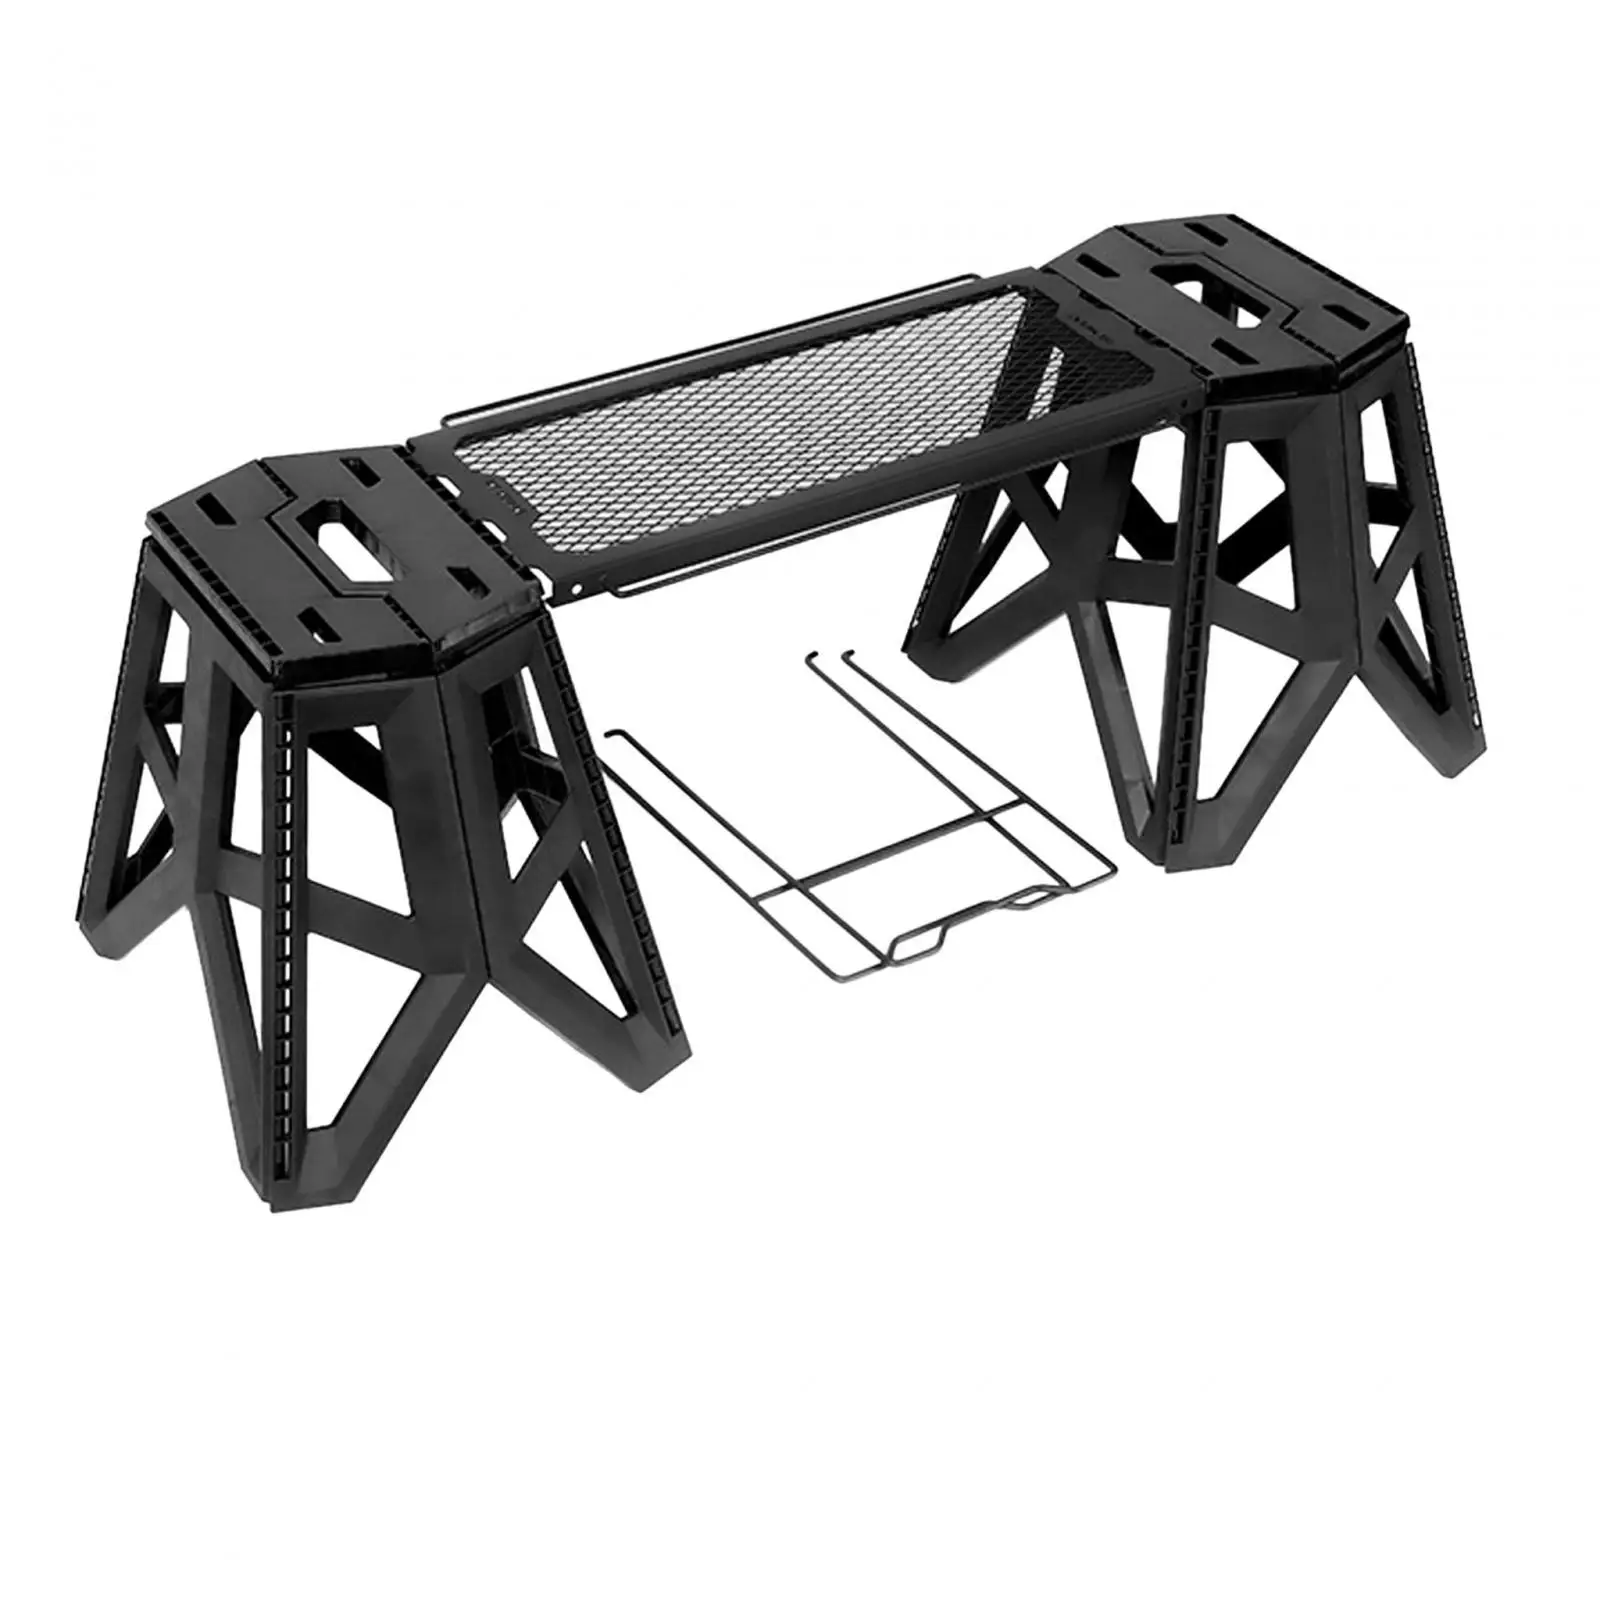 Camping Stool and Table Folding Table Storage Rack Outdoor Table and Stools Collapsible Stool Folding Stool Adults for Beach